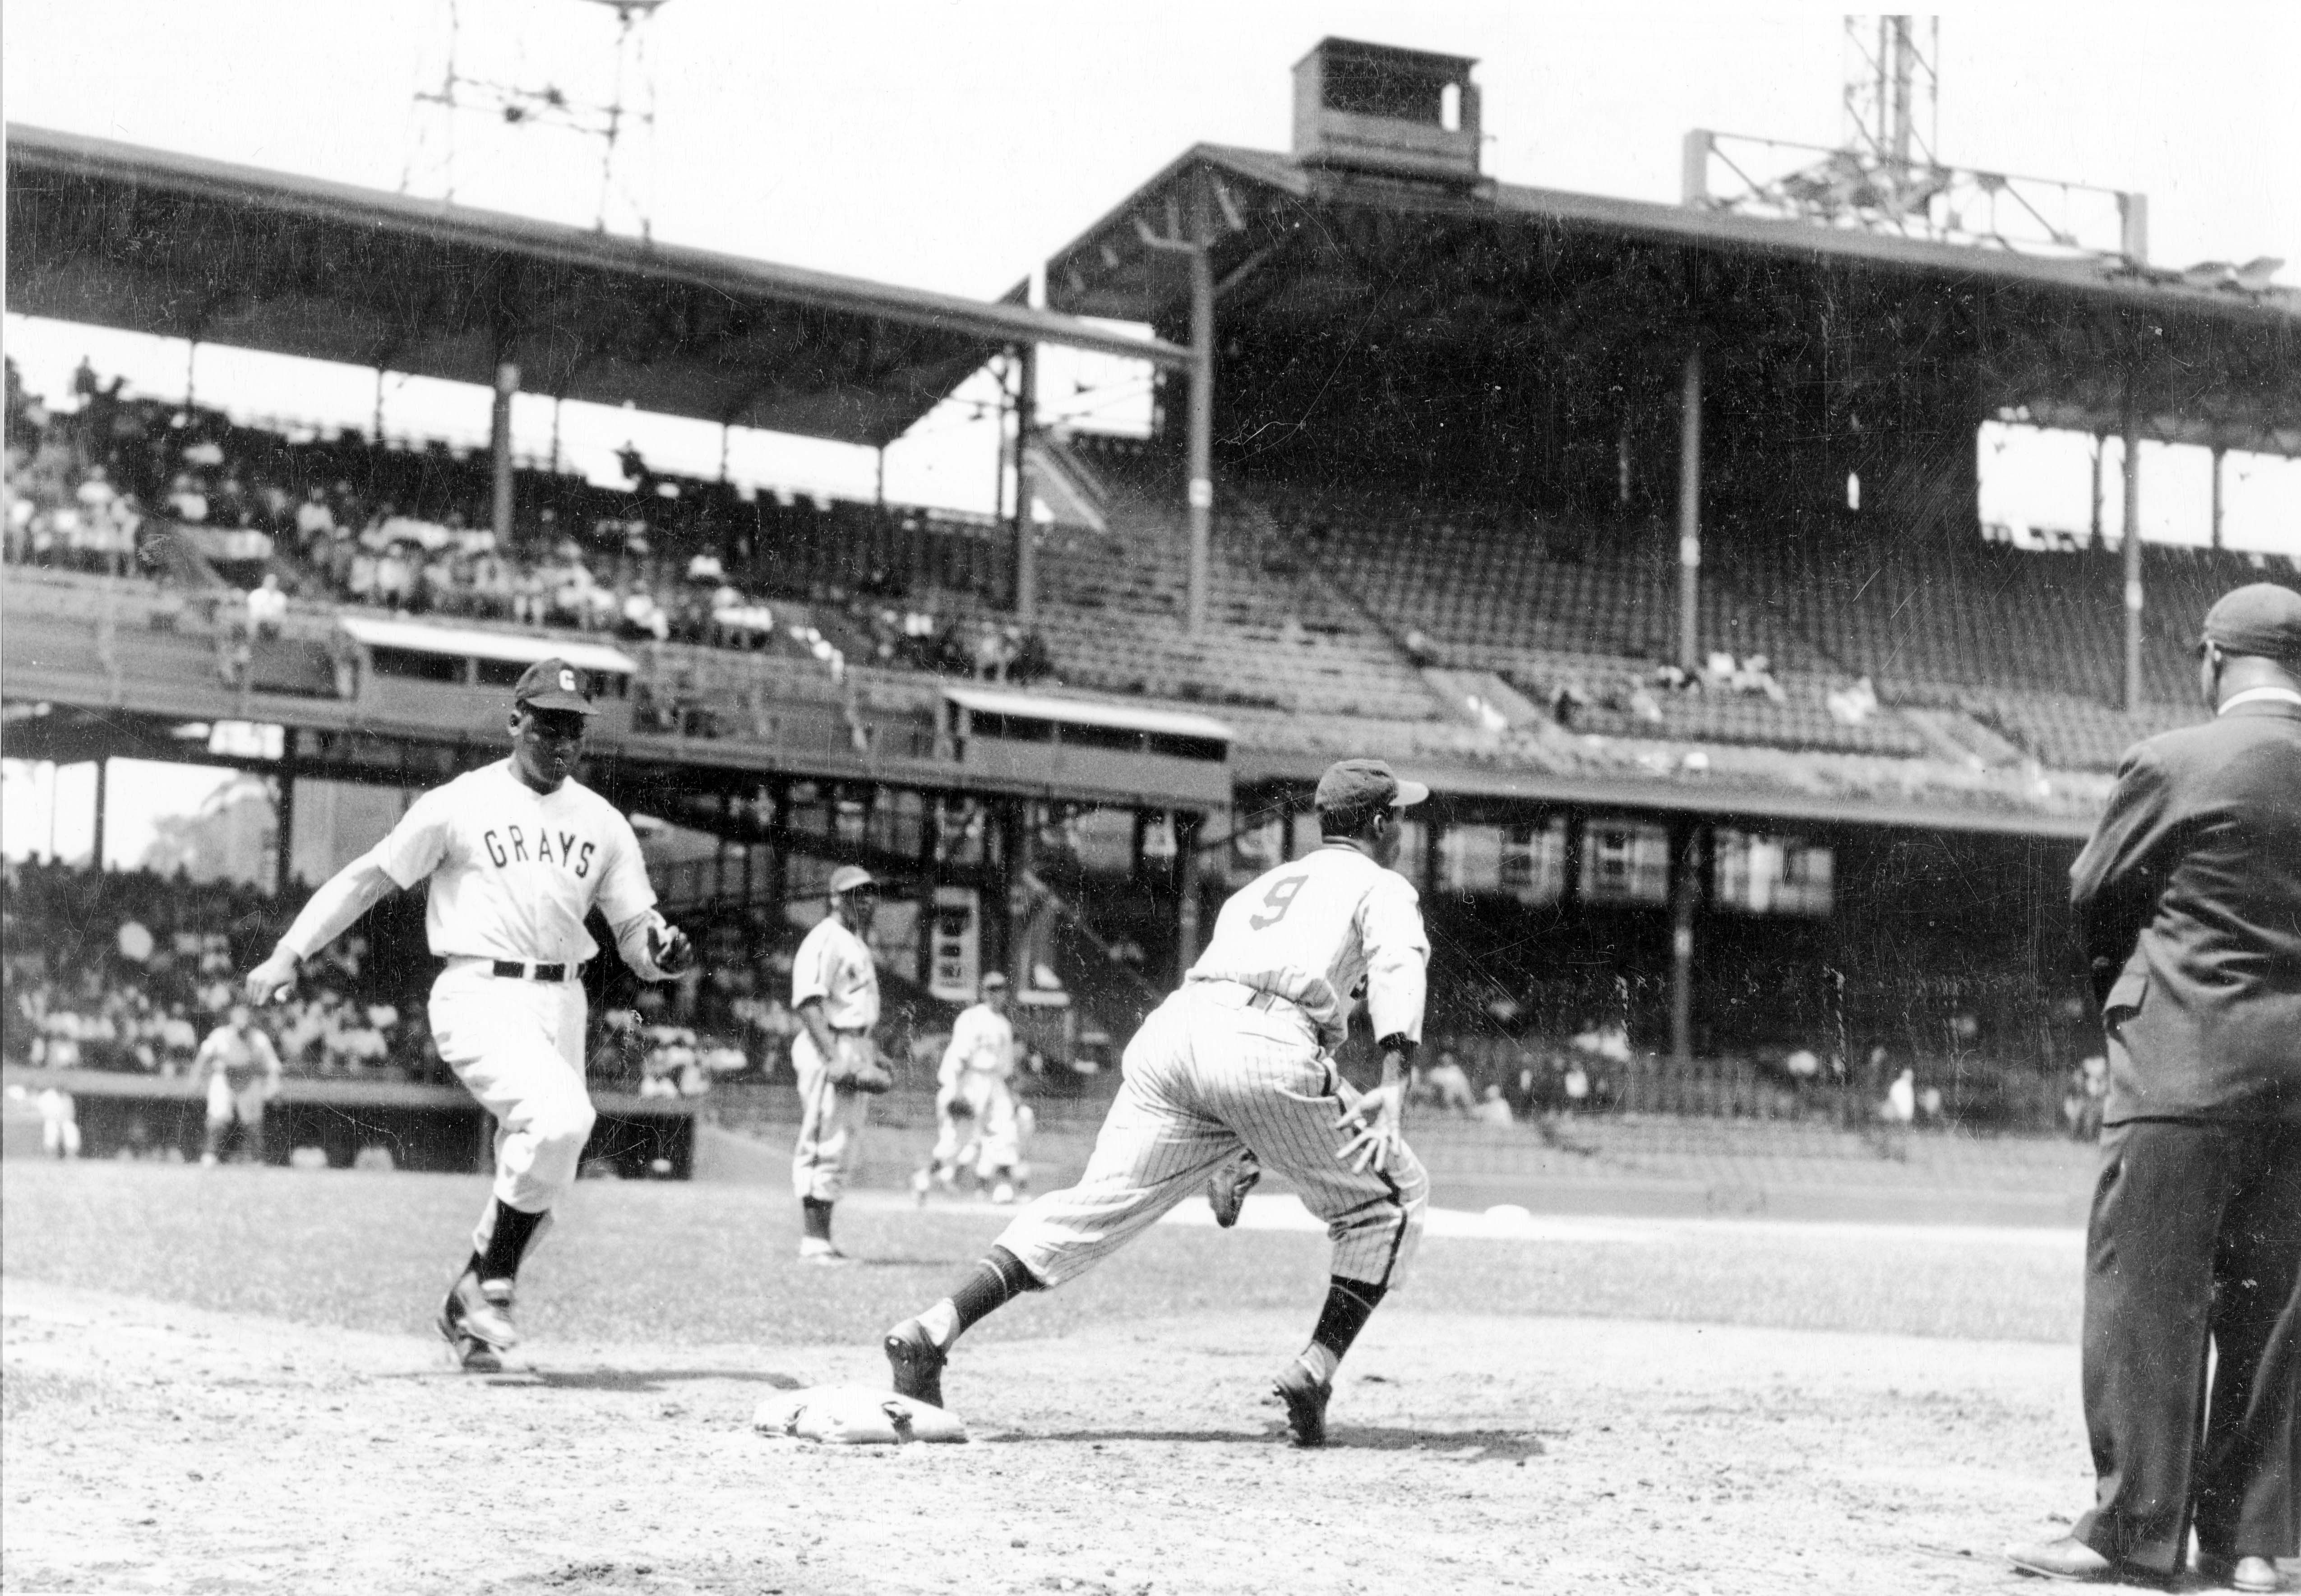 Negro League game between the home team Homestead Grays versus the New York Black Yankees at Griffith Stadium, Washington DC, 1940.